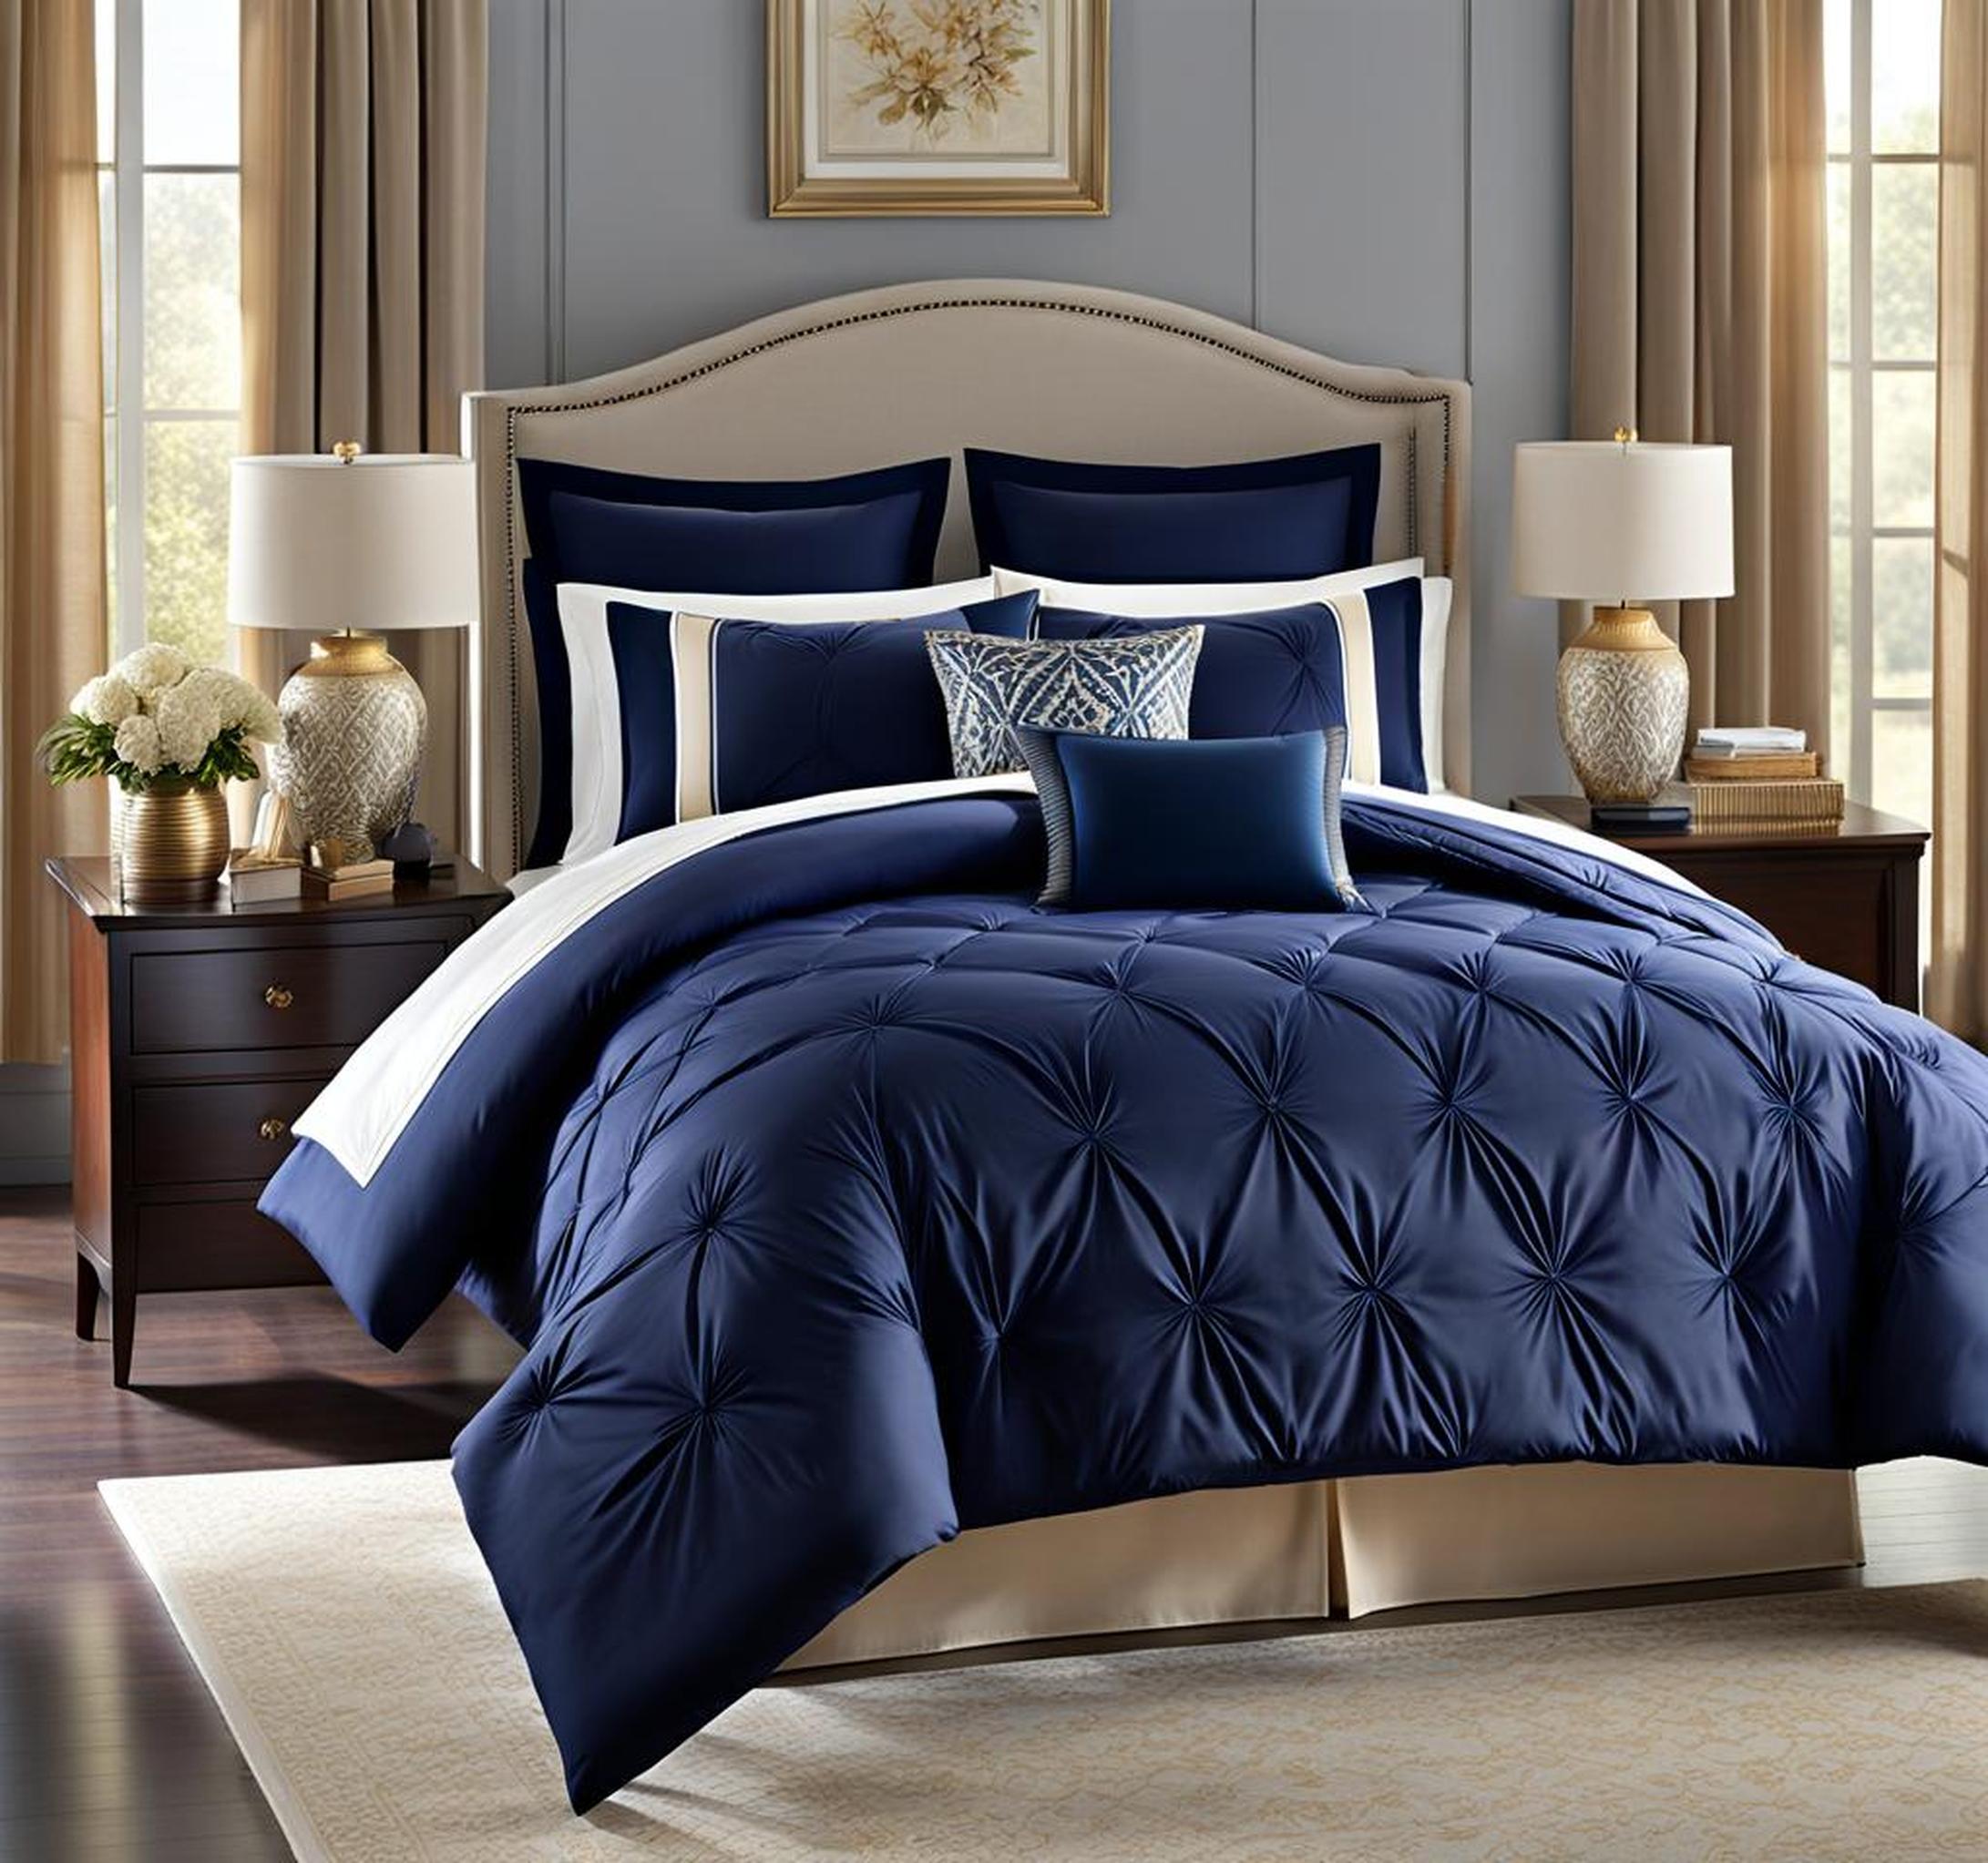 comforters with navy blue